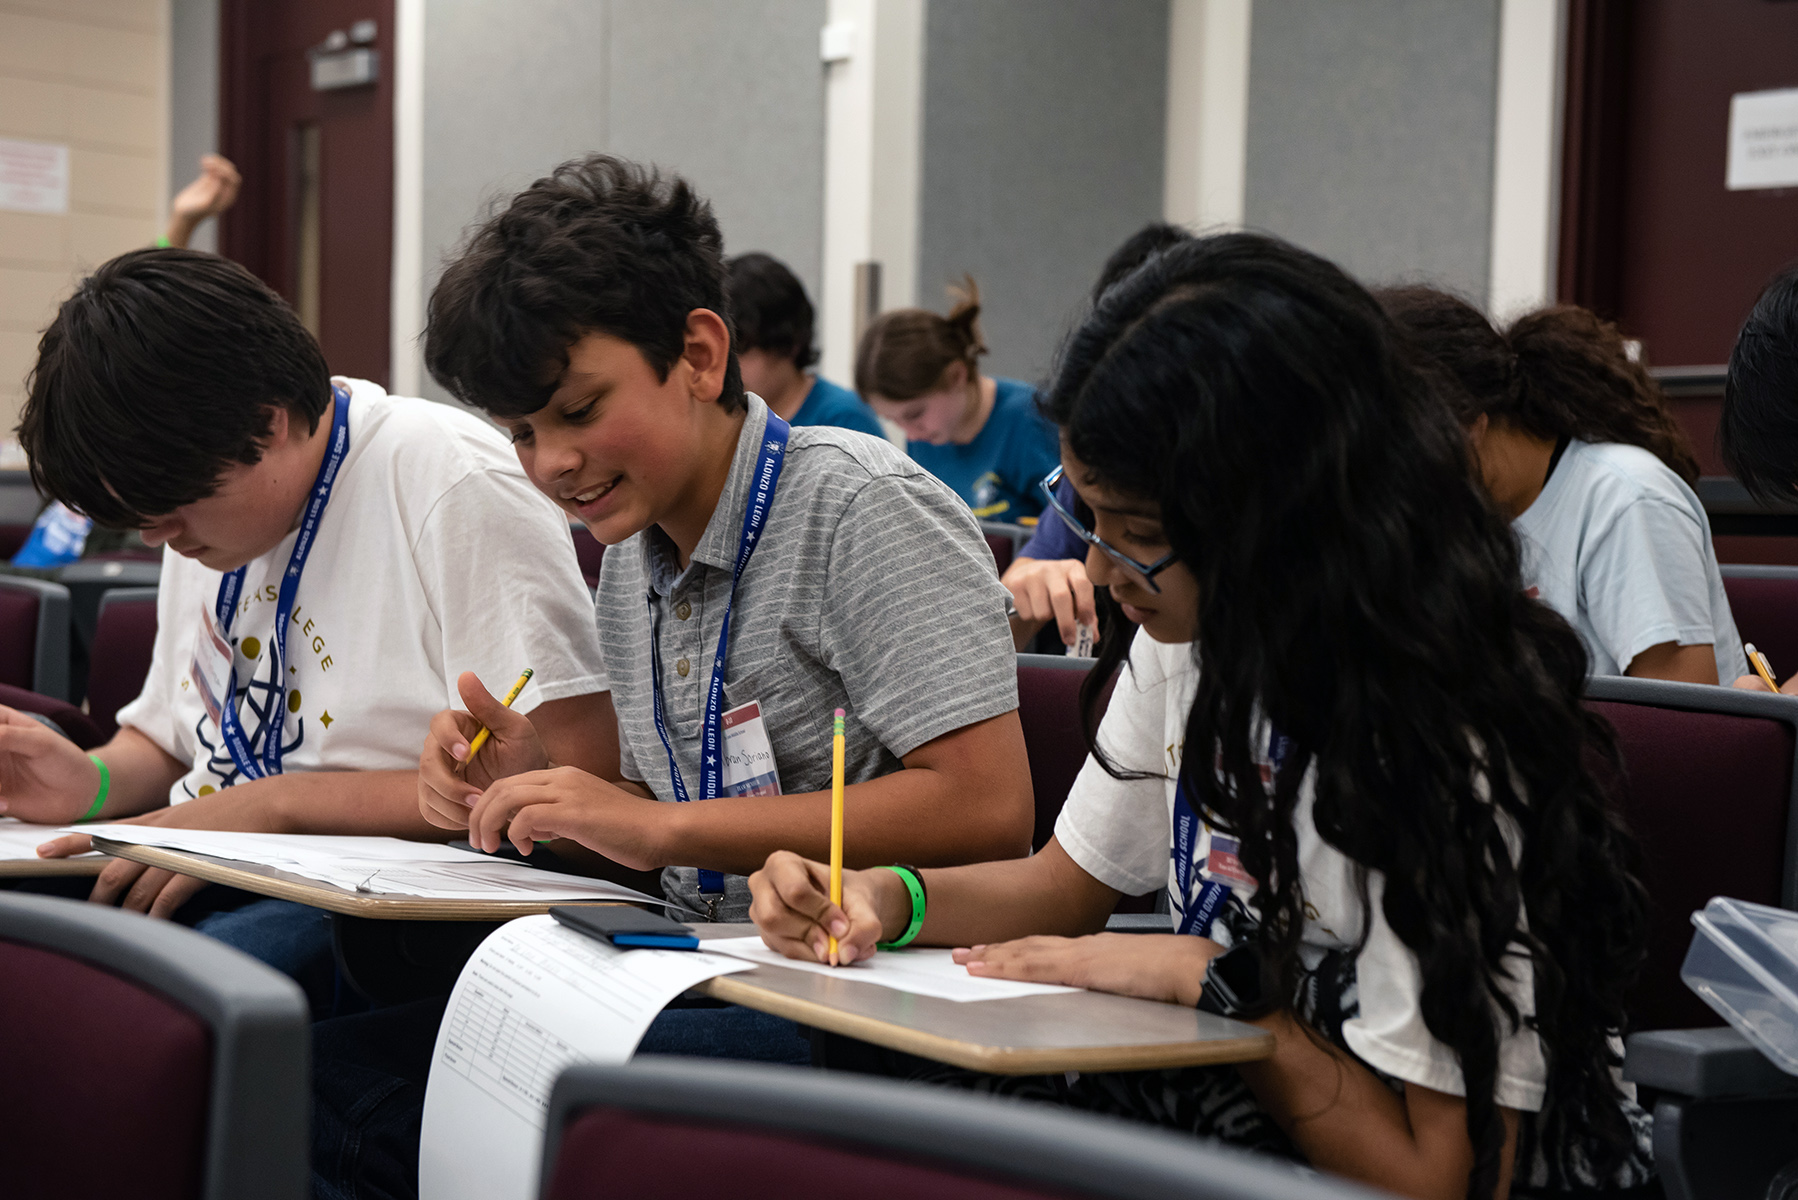 Students competing in the Texas Science Olympiad sit at desks in a classroom while solving problems to complete a written examination